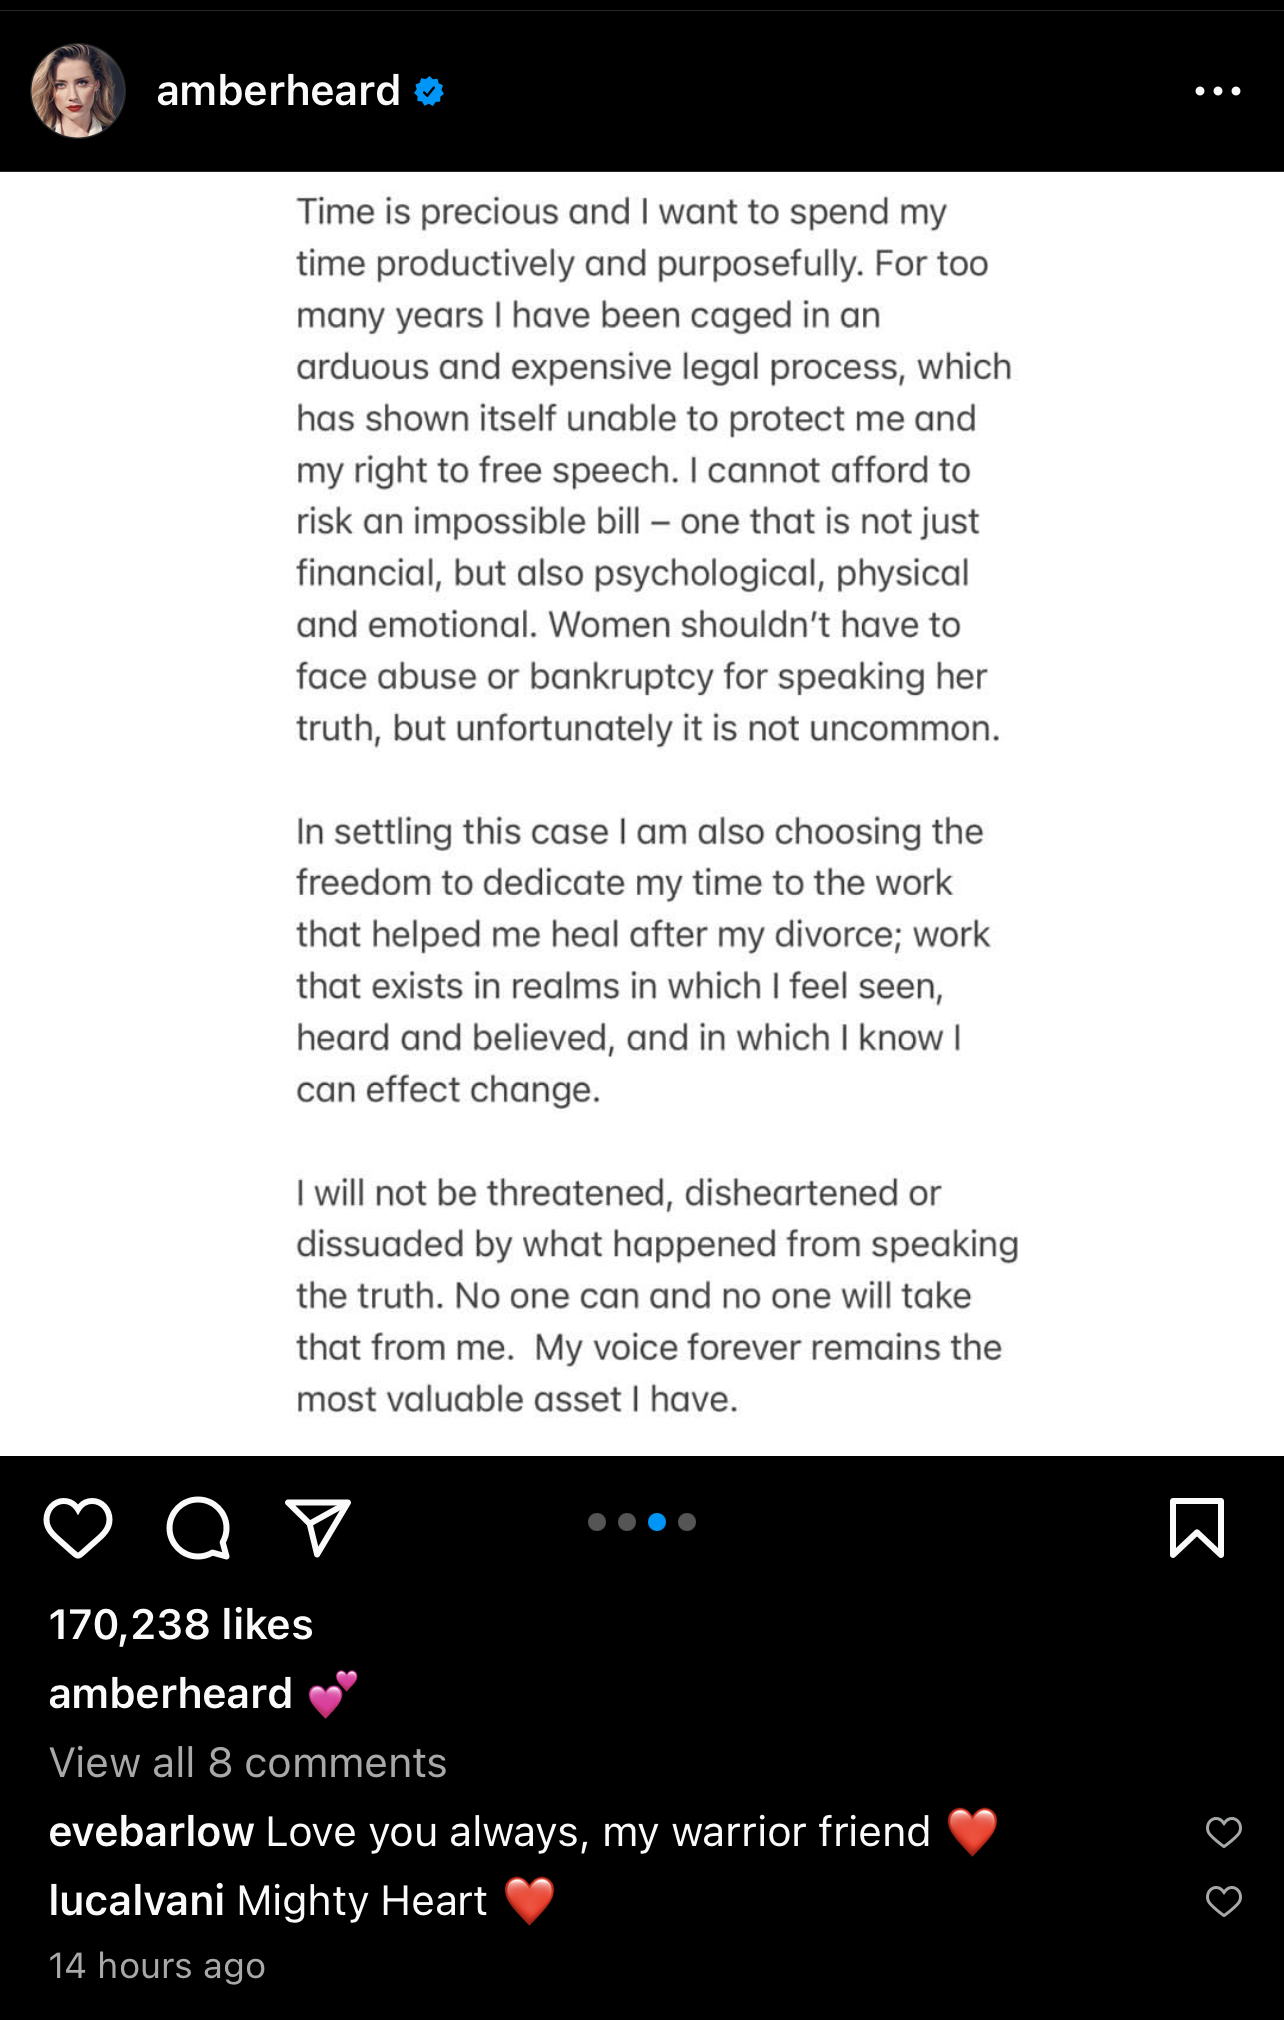 Amber Heard announces the withdrawal of her appeal via Instagram